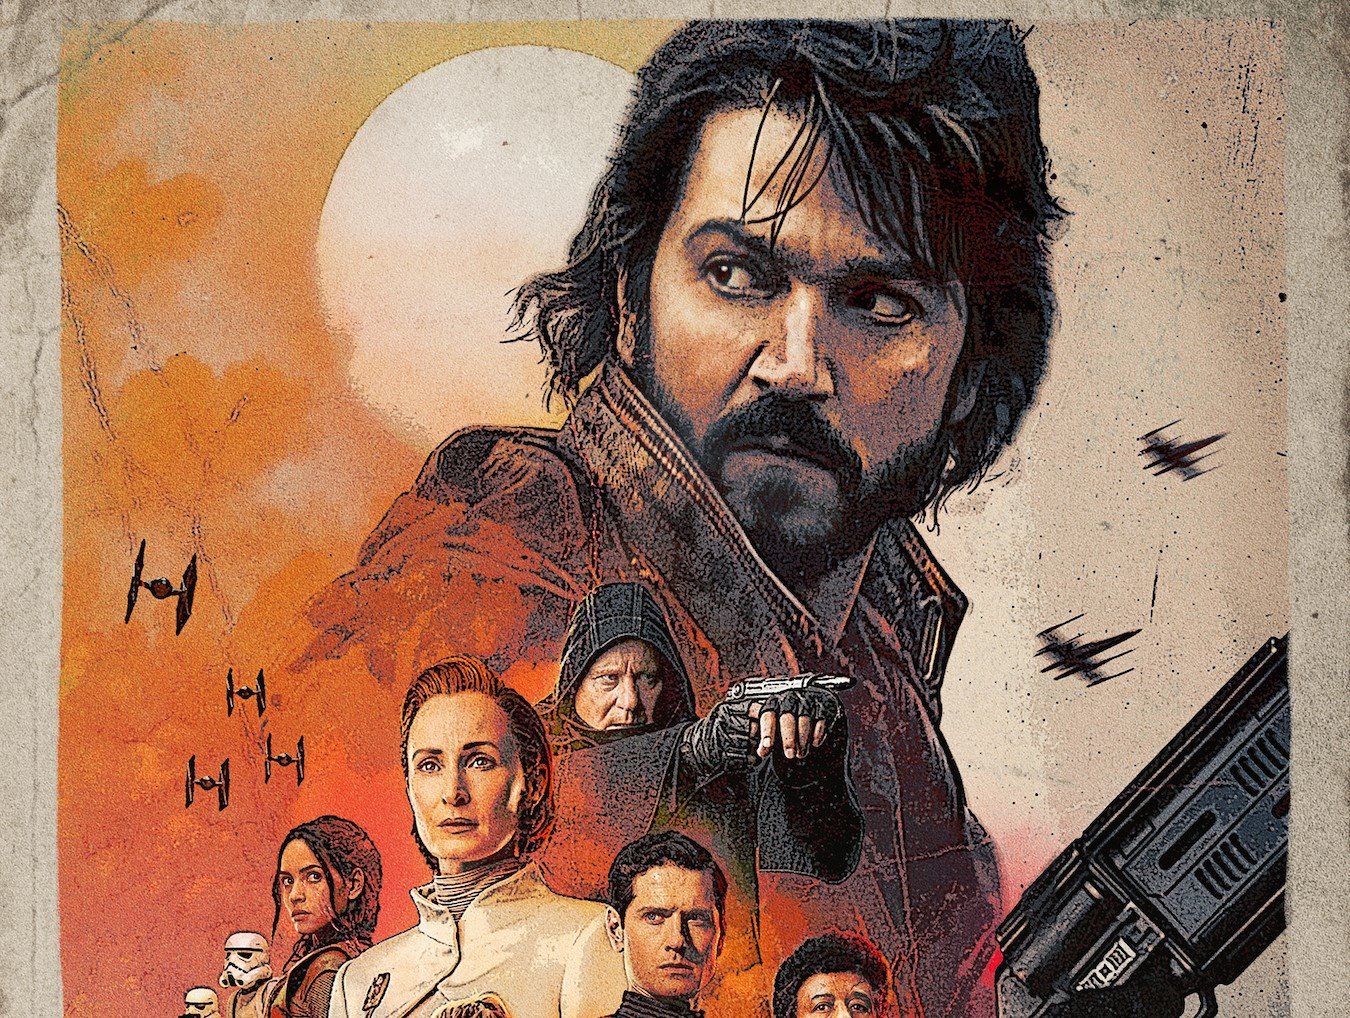 Key art for 'Andor' for our article about the blue noodles in episode 1. It features Diego Luna as Cassian Andor on the top, with the rest of the cast below him. There's a moon in the background, and the backdrop is white and orange.